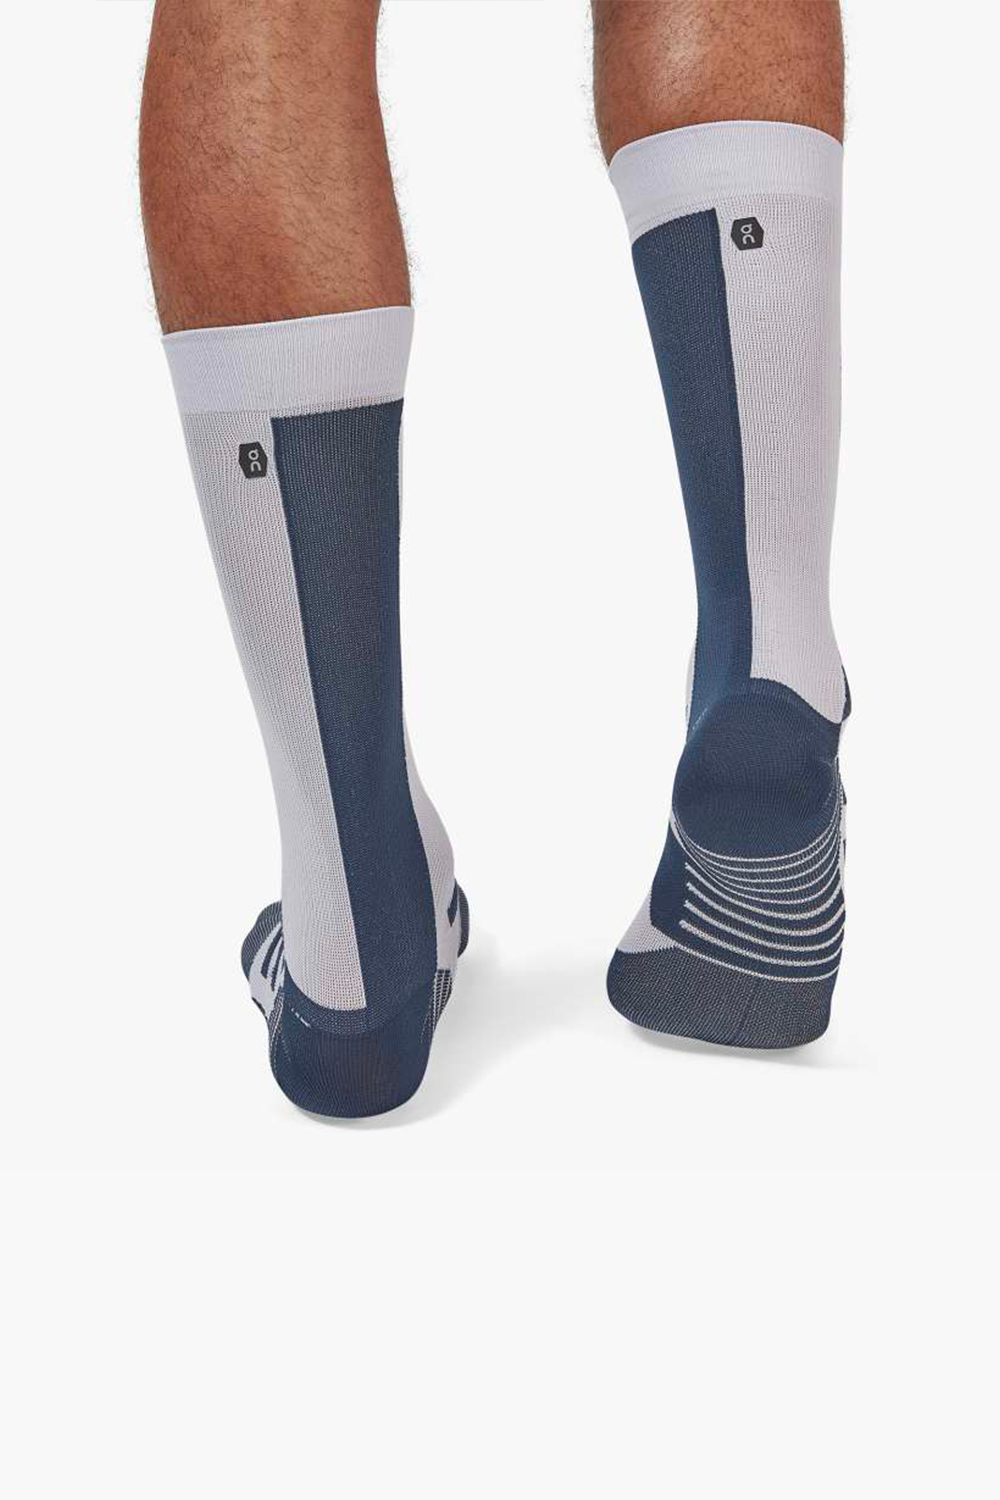 ON | Men's High Sock in Navy/Lilac